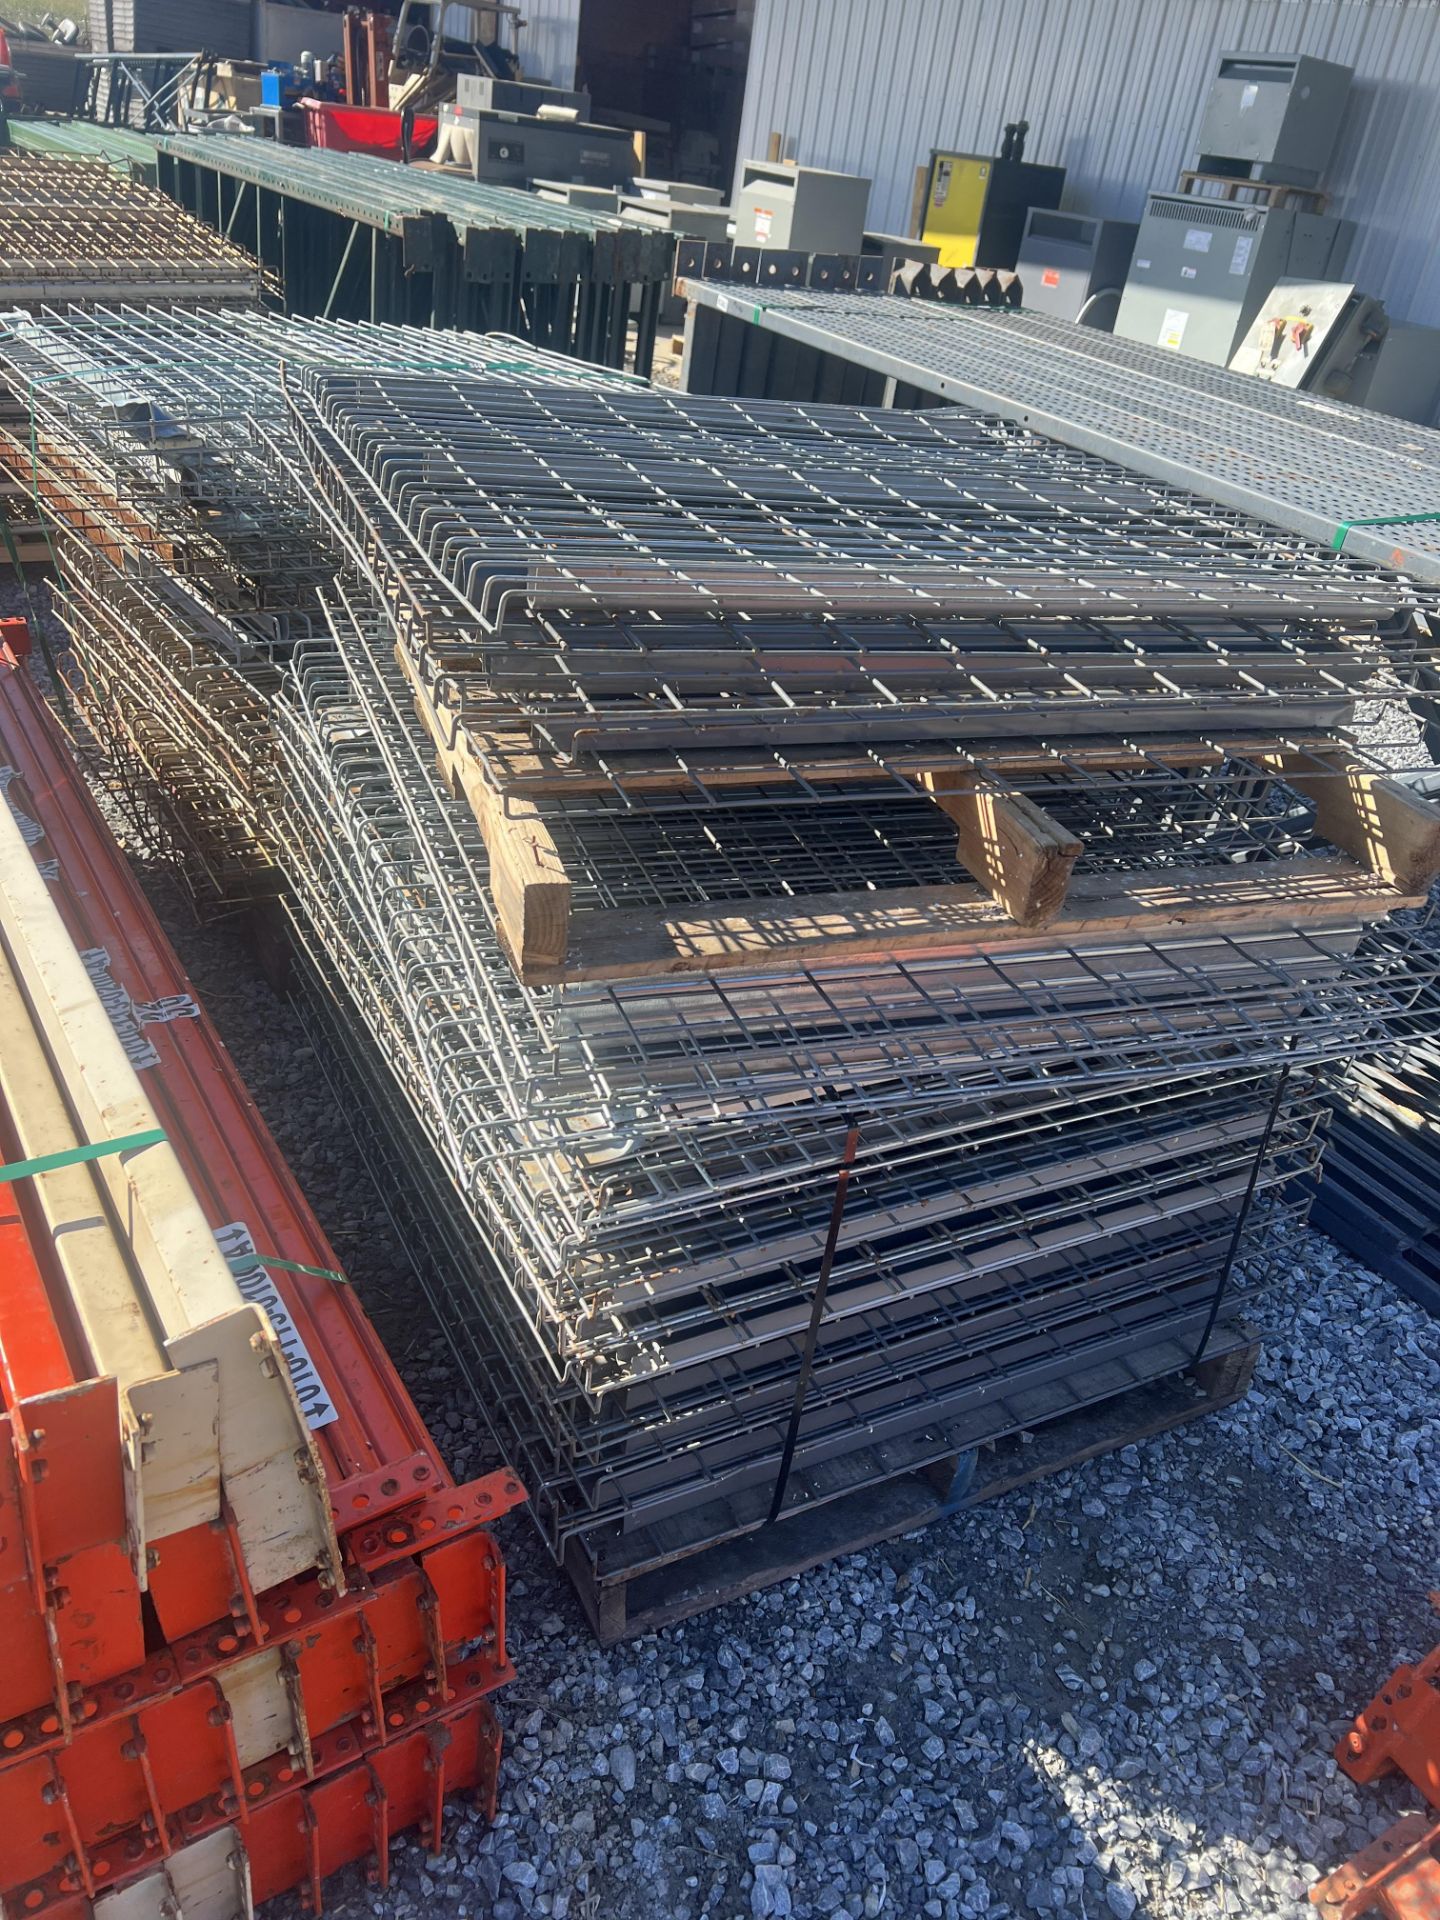 Lot of Pallet Racking Uprights, Rails and Grates - Image 2 of 3